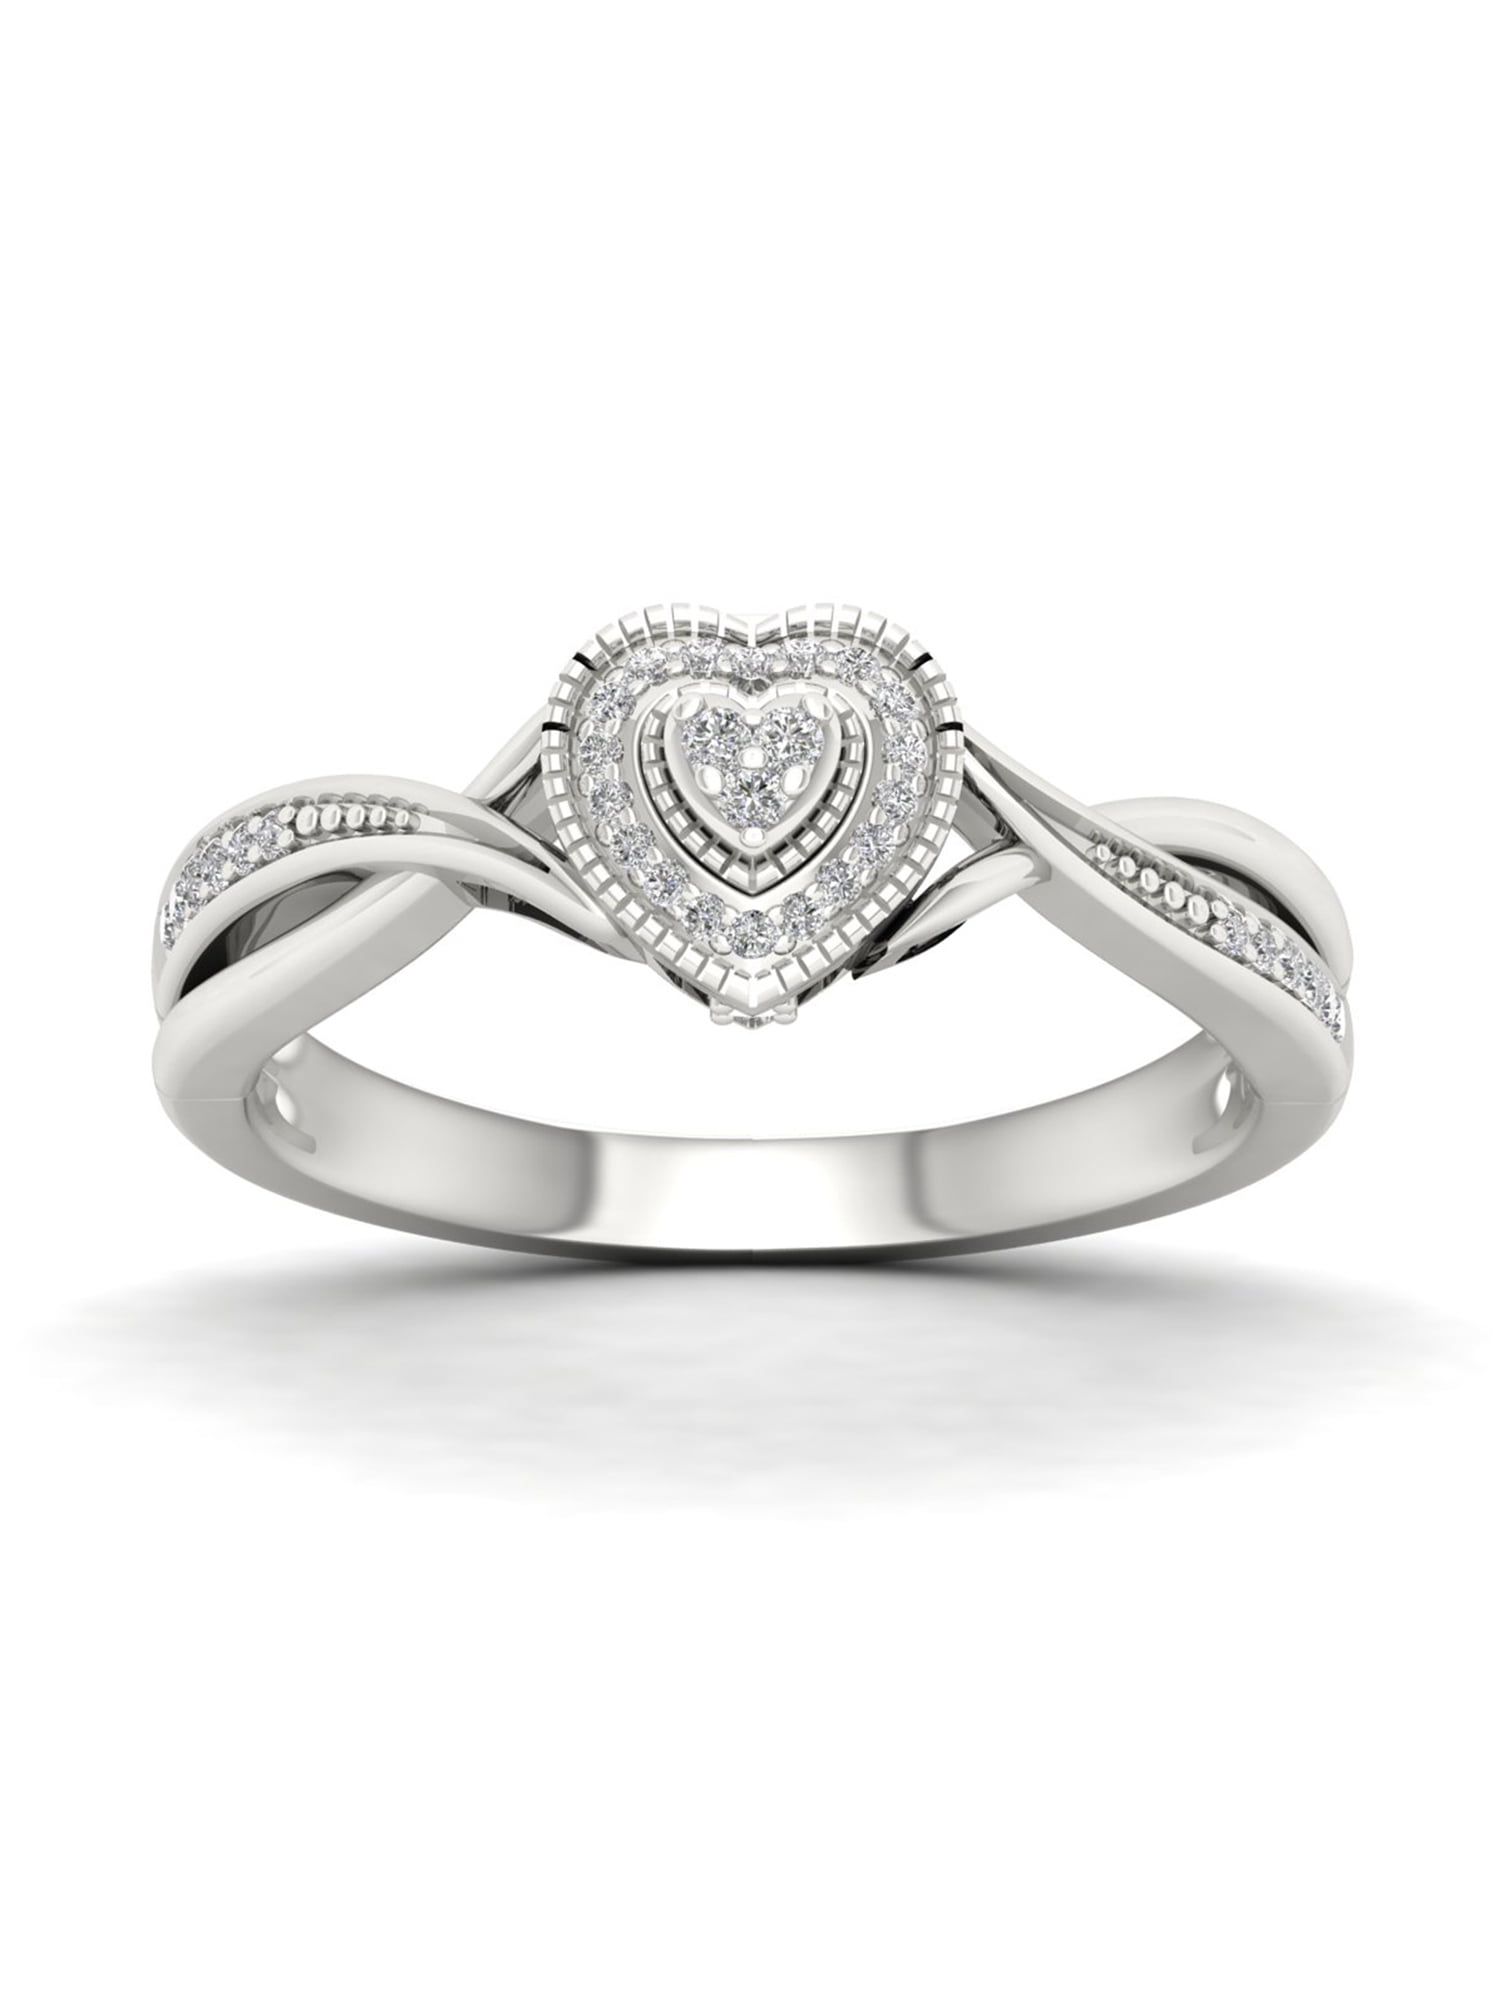 1/10Ct TDW Diamond S925 Sterling Silver Heart Ring